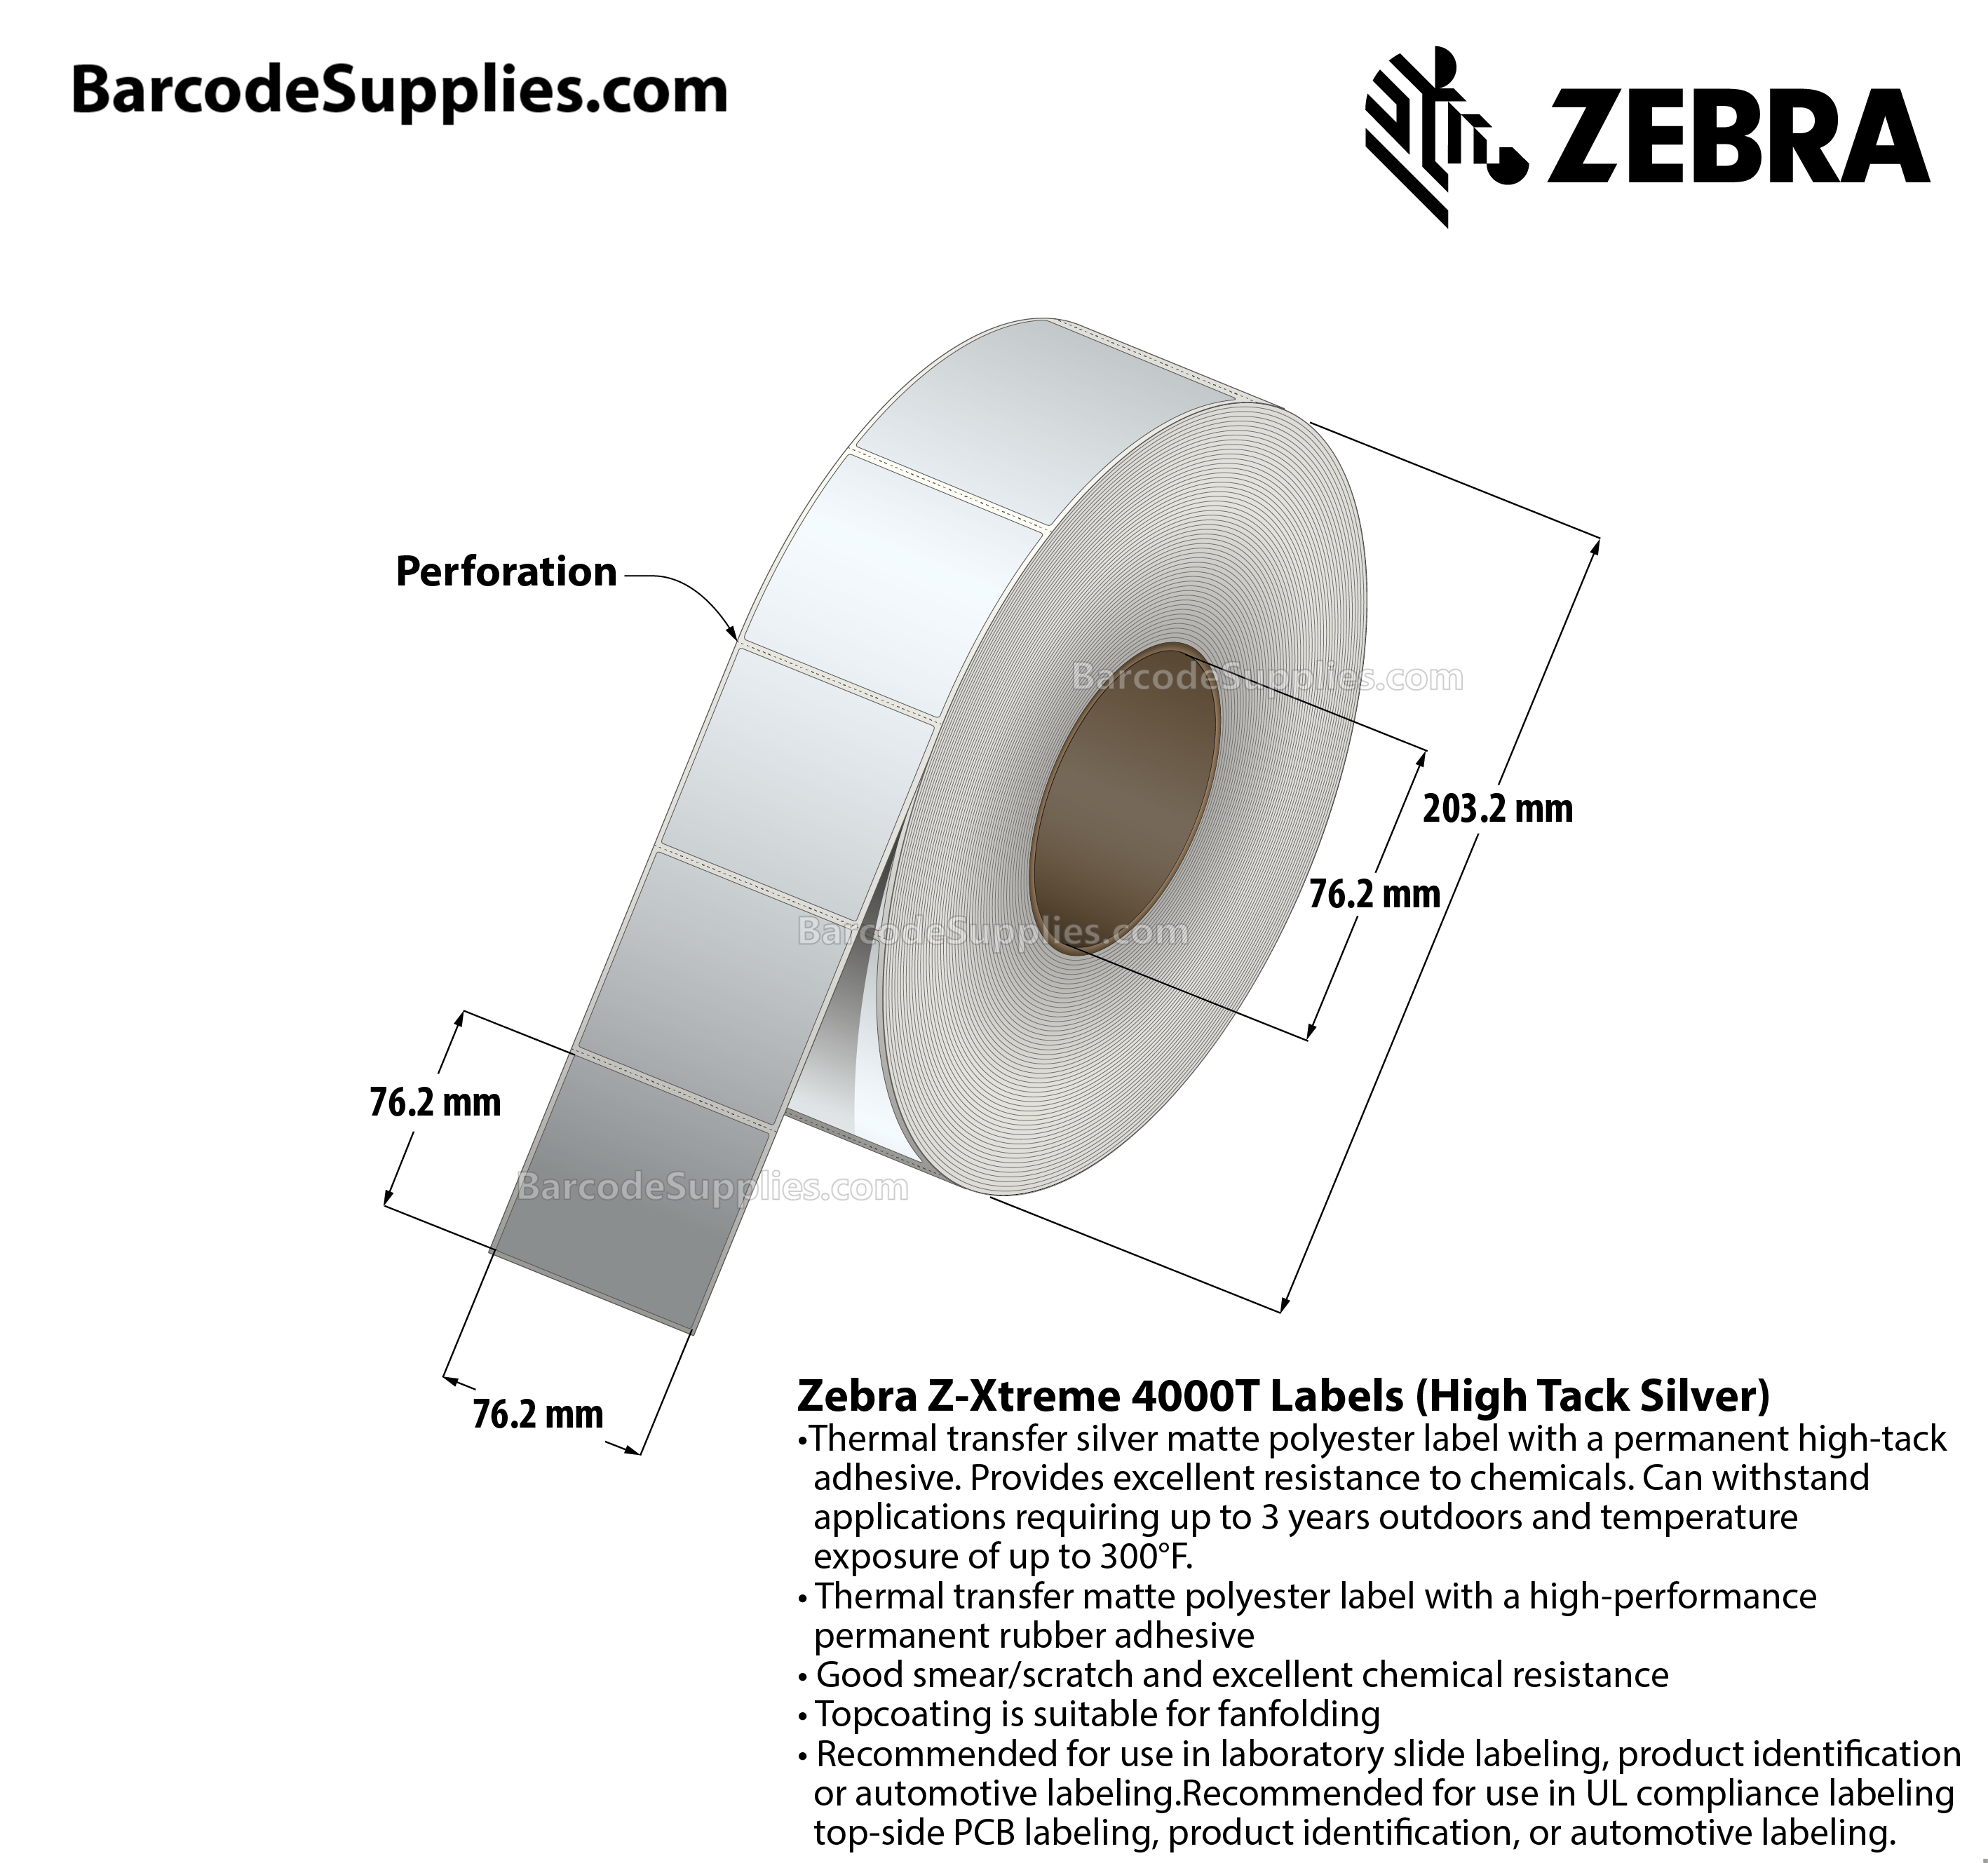 3 x 3 Thermal Transfer Silver Z-Xtreme 4000T High-Tack Silver Labels With High-tack Adhesive - Perforated - 1000 Labels Per Roll - Carton Of 1 Rolls - 1000 Labels Total - MPN: 10023181